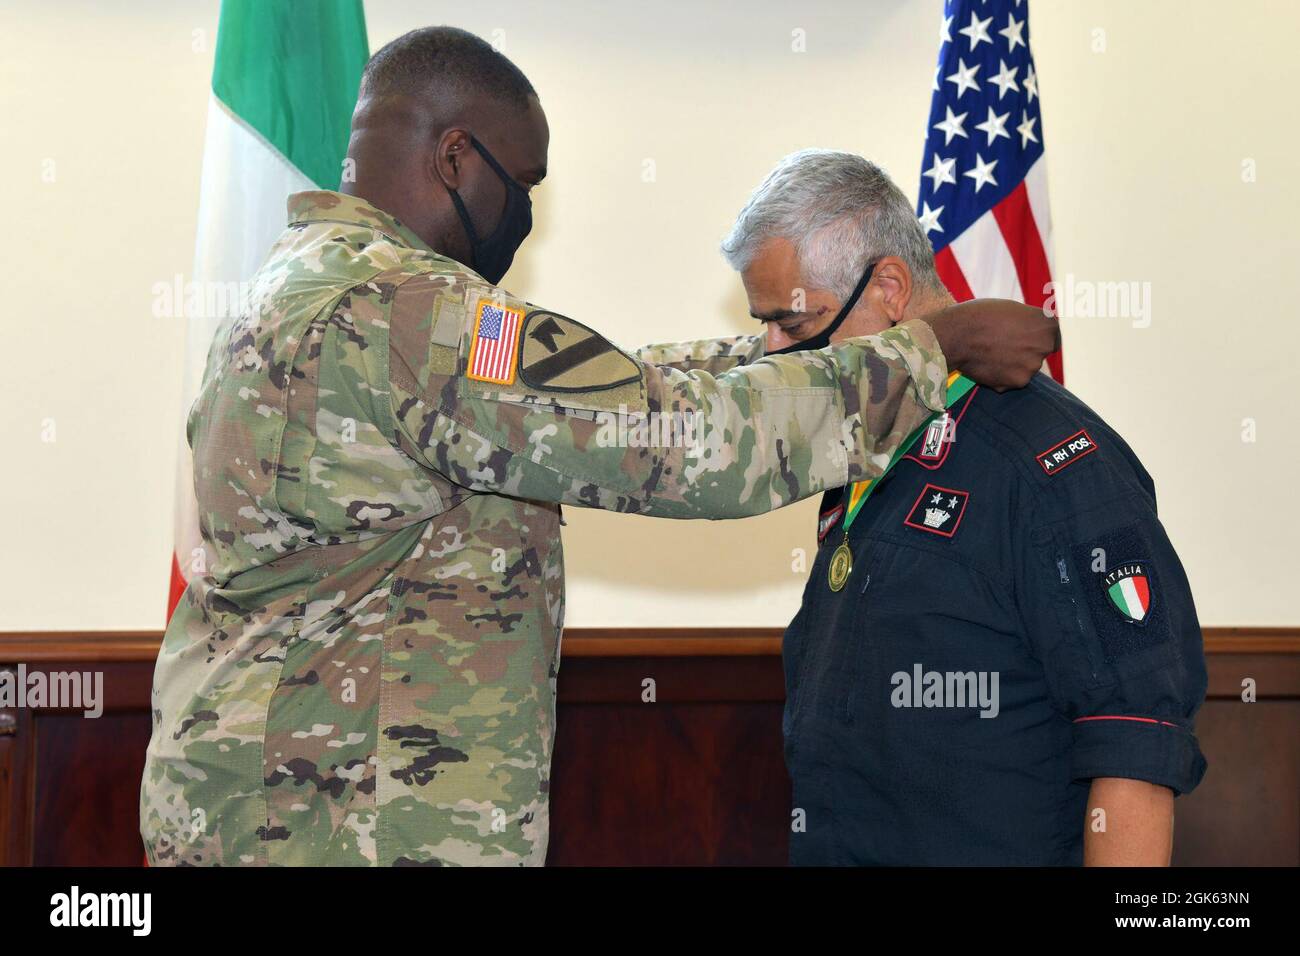 Lt. Col. Francesco Provvidenza, right, Company Commander of the Italian Army Carabinieri South European Task Force receives medal of the Military Police Regiment Association for the Friend of the Regiment Award from U.S. Army Lt. Col. Vaughan M. Byrum, Director of Emergency Services U.S. Army Garrison Italy, under Covid-19 prevention condition at Caserma Ederle, Vicenza, Italy August 12, 2021. Stock Photo